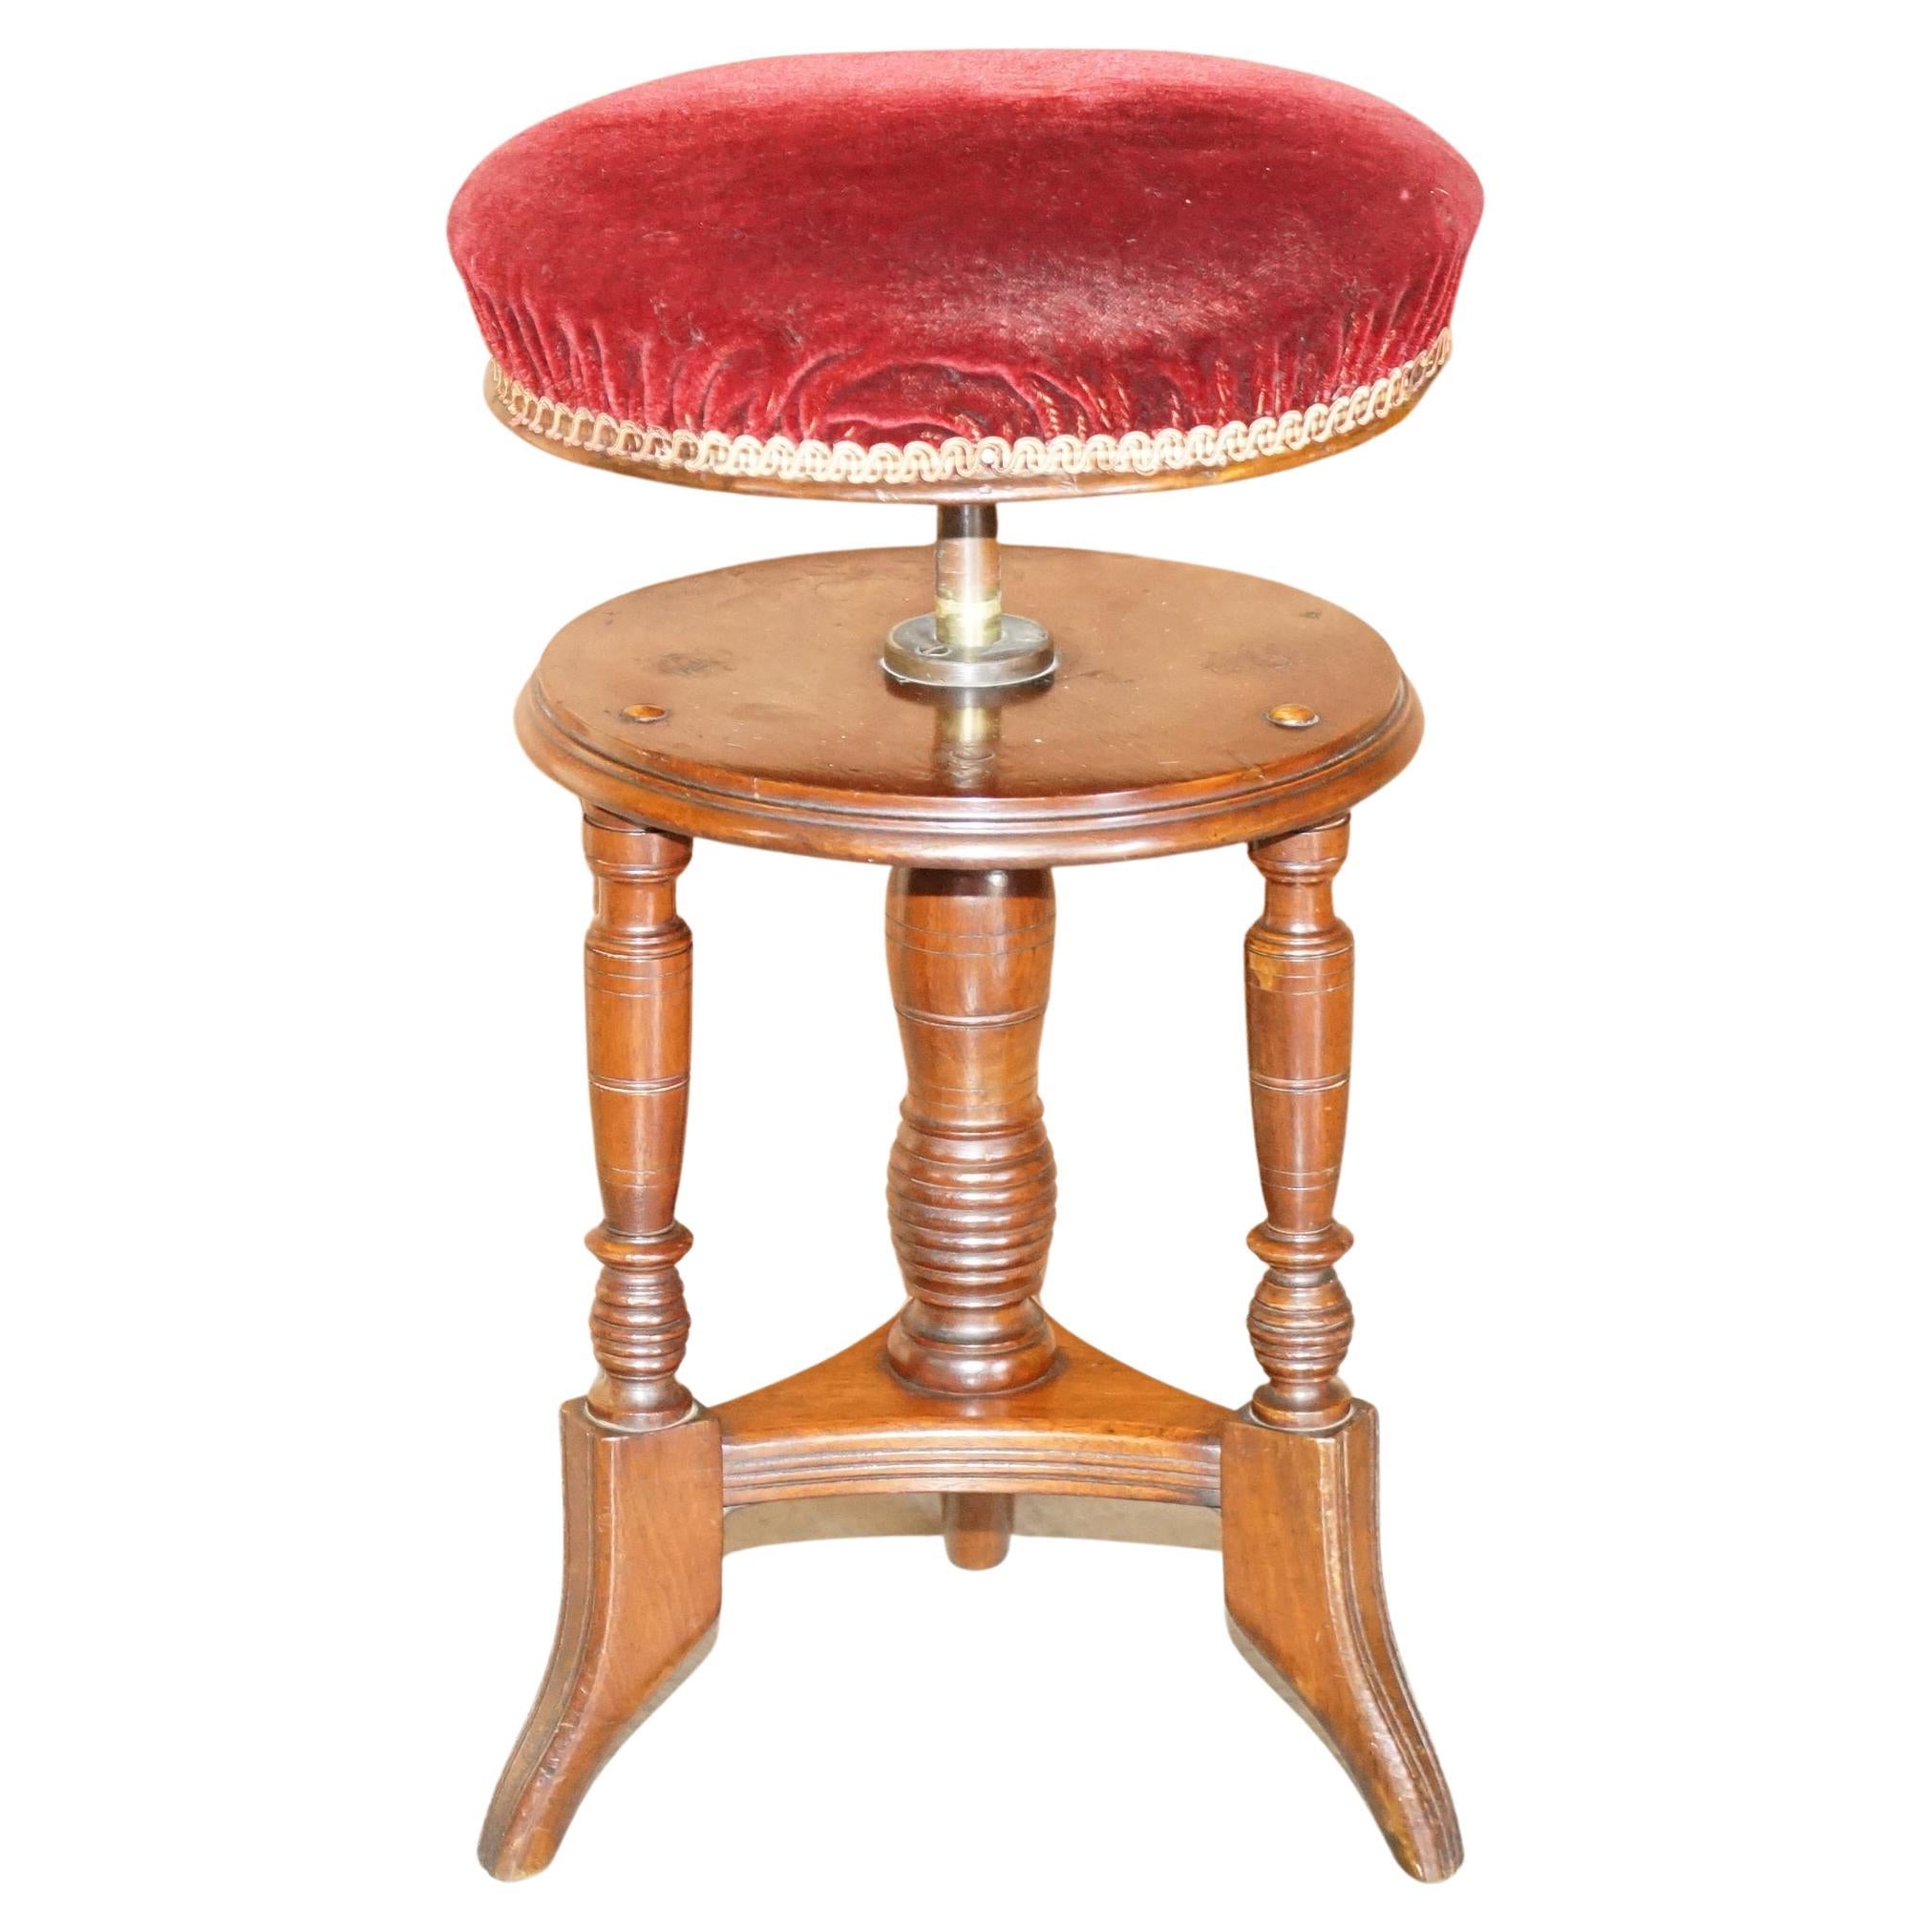 Antique Victorian Hardwood Piano Stool with Decorative Base Height Adjustable For Sale